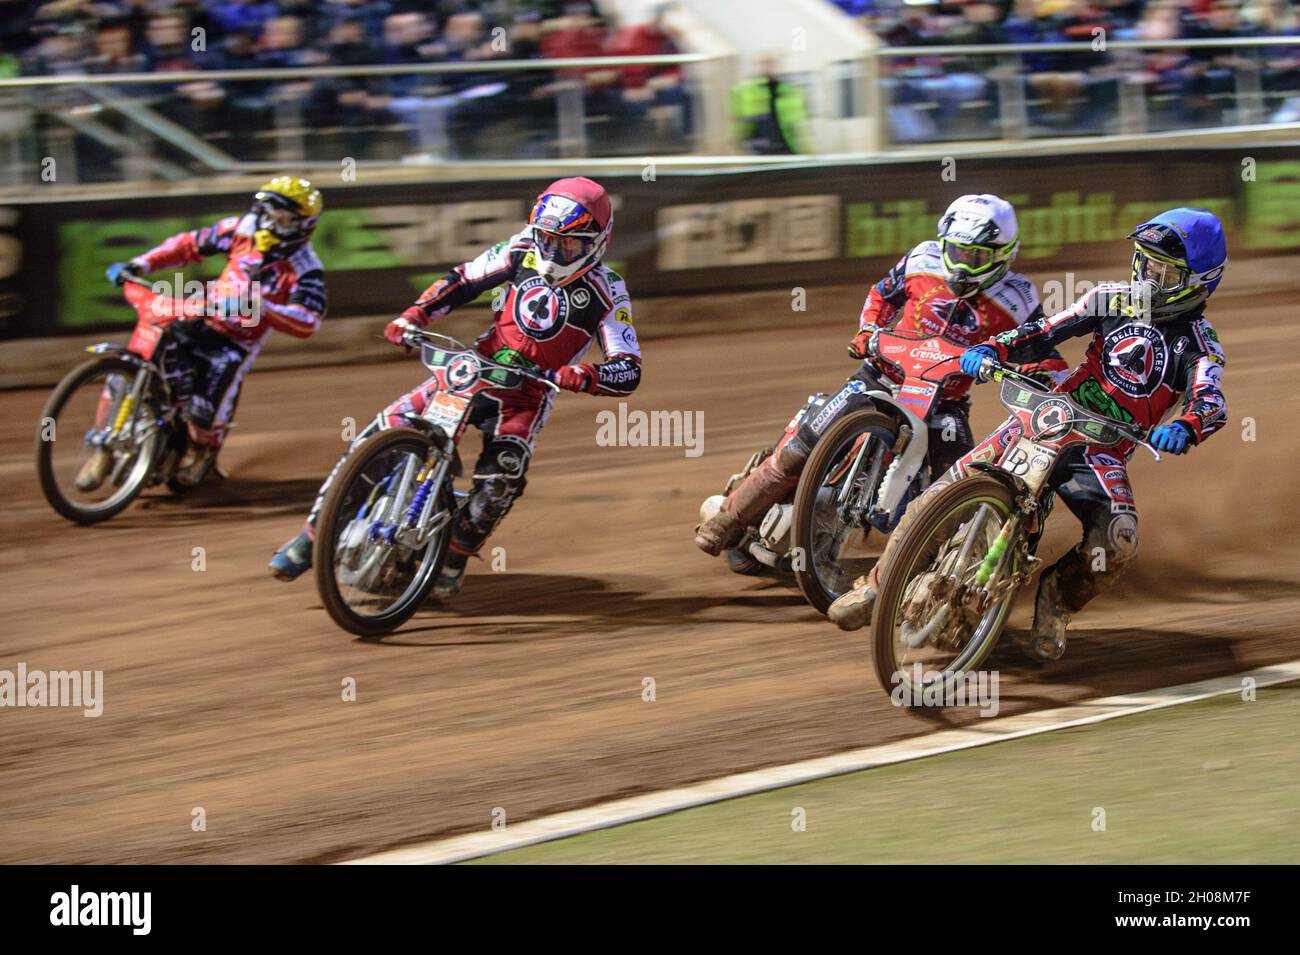 GOOD  CONDITION 2015 WORKINGTON  v PETERBOROUGH PANTHERS 25th JULY 